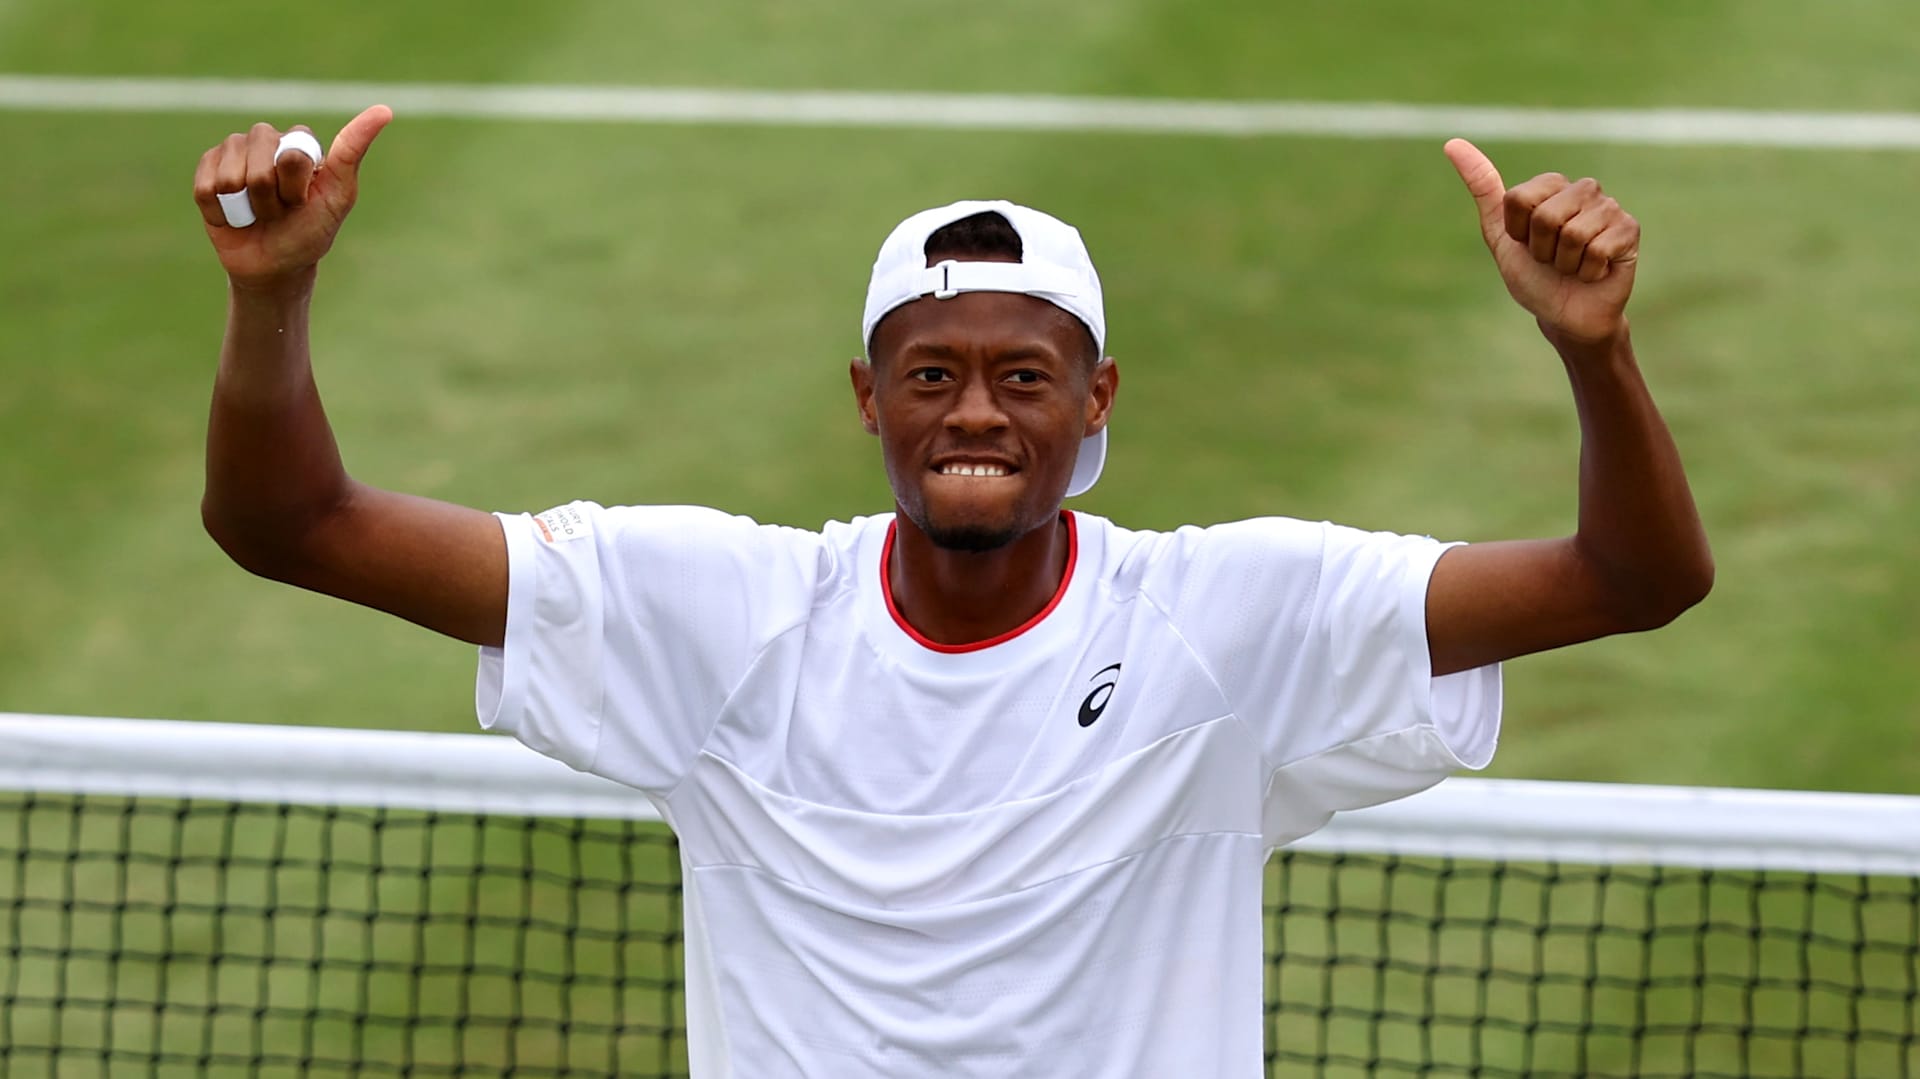 Chris Eubanks The remarkable journey of the 27-year-old American who shocked the tennis world at Wimbledon